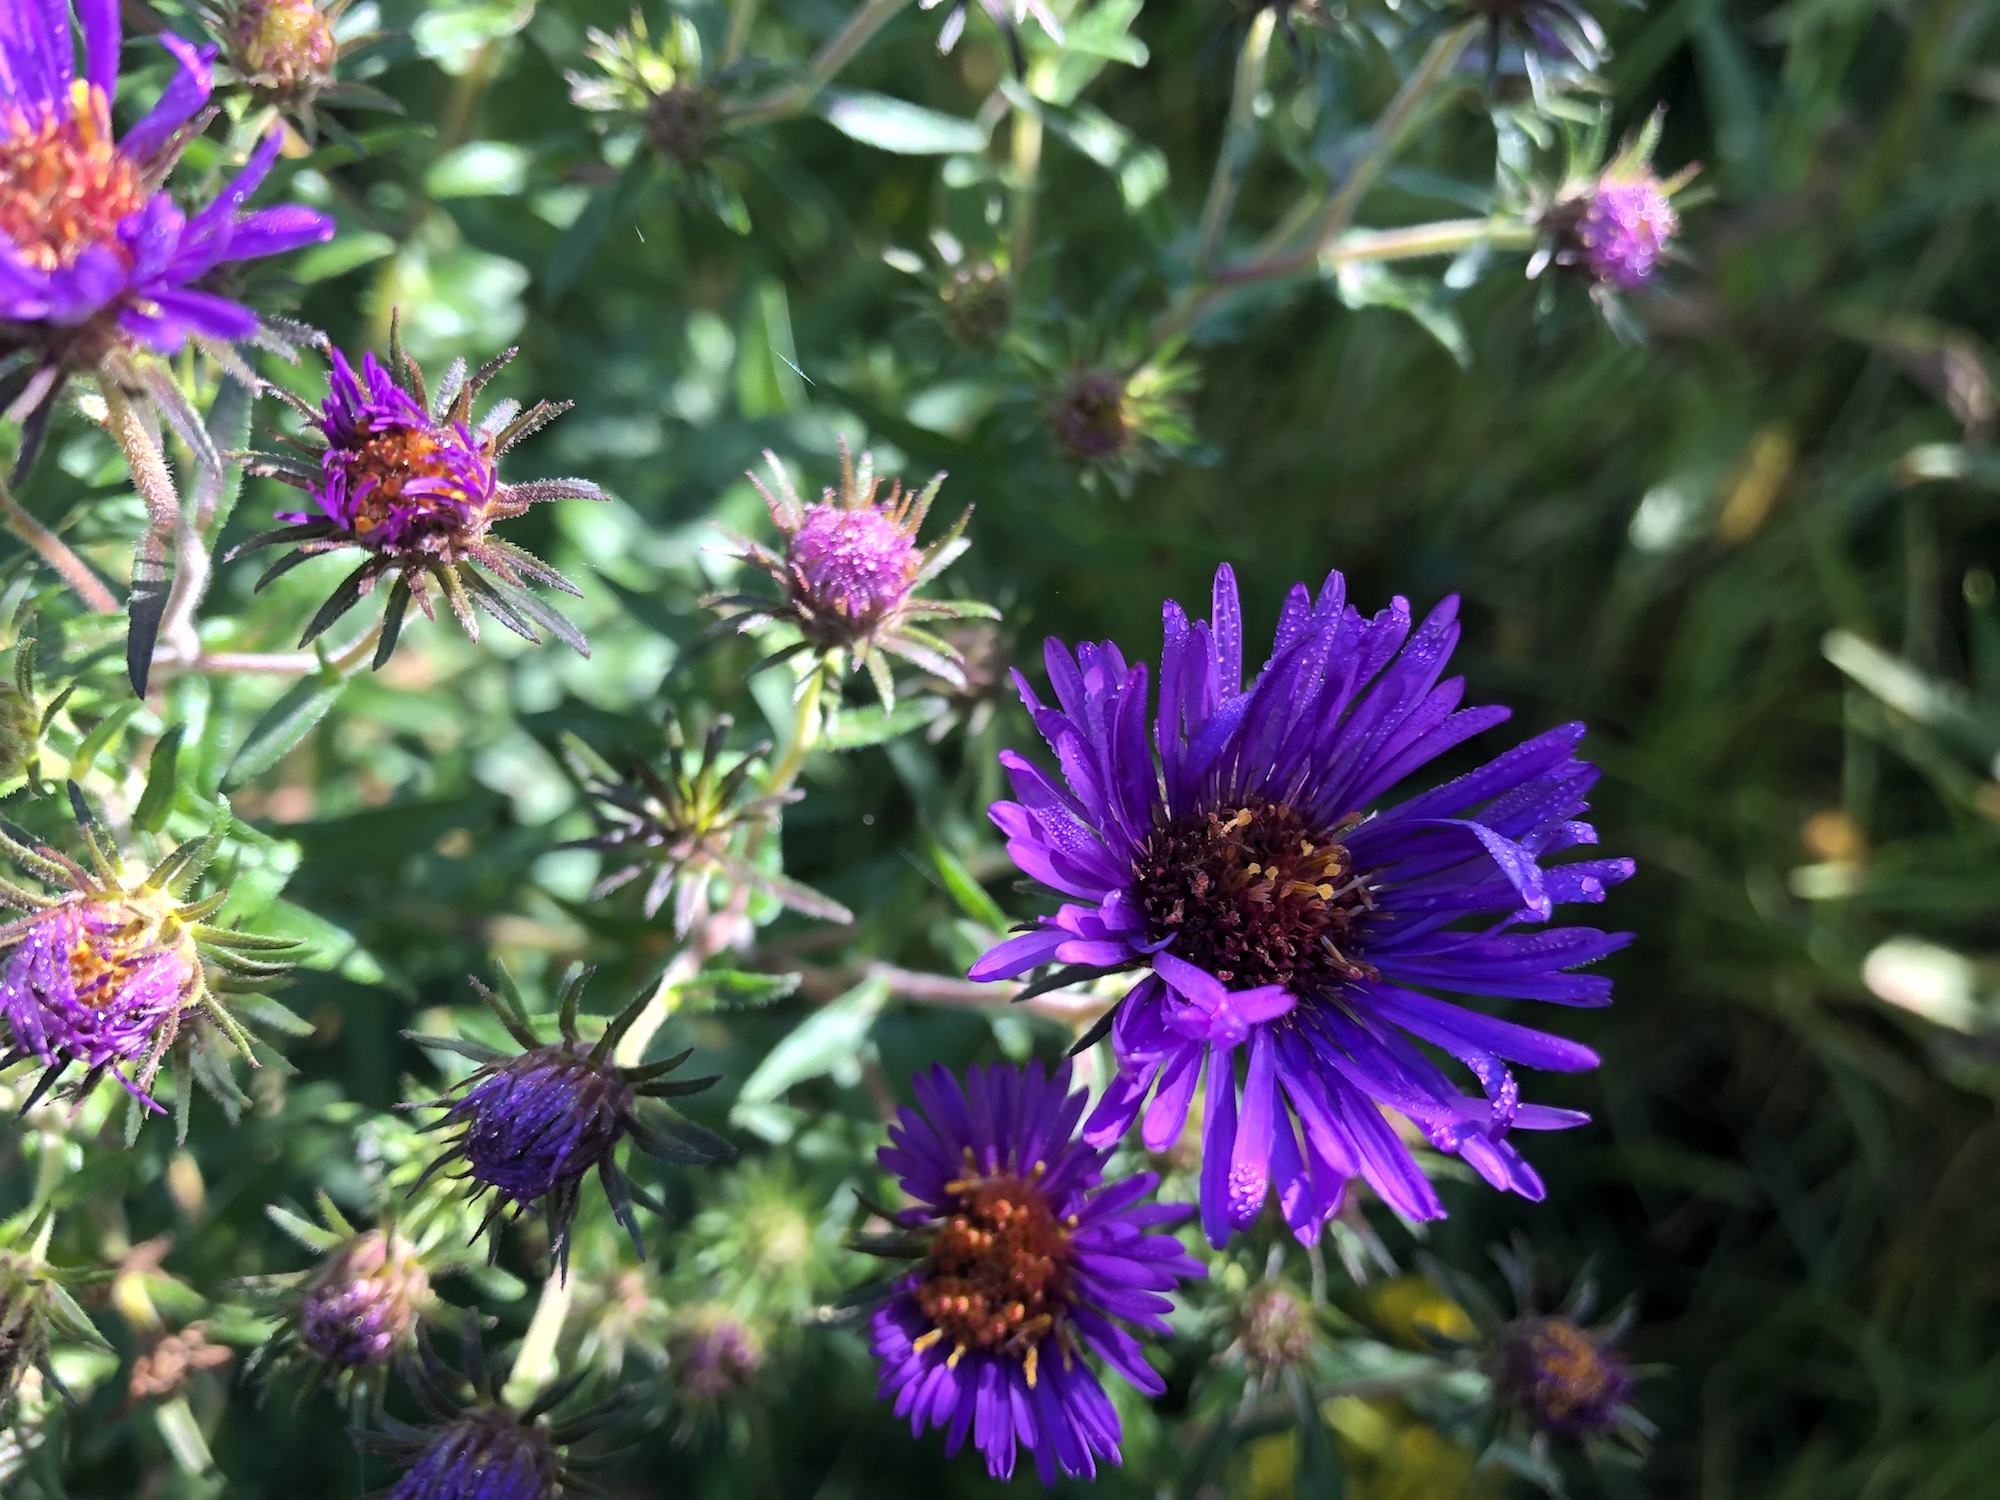 New England Aster in Oak Savanna in Madison, Wisconsin on September 14, 2019.